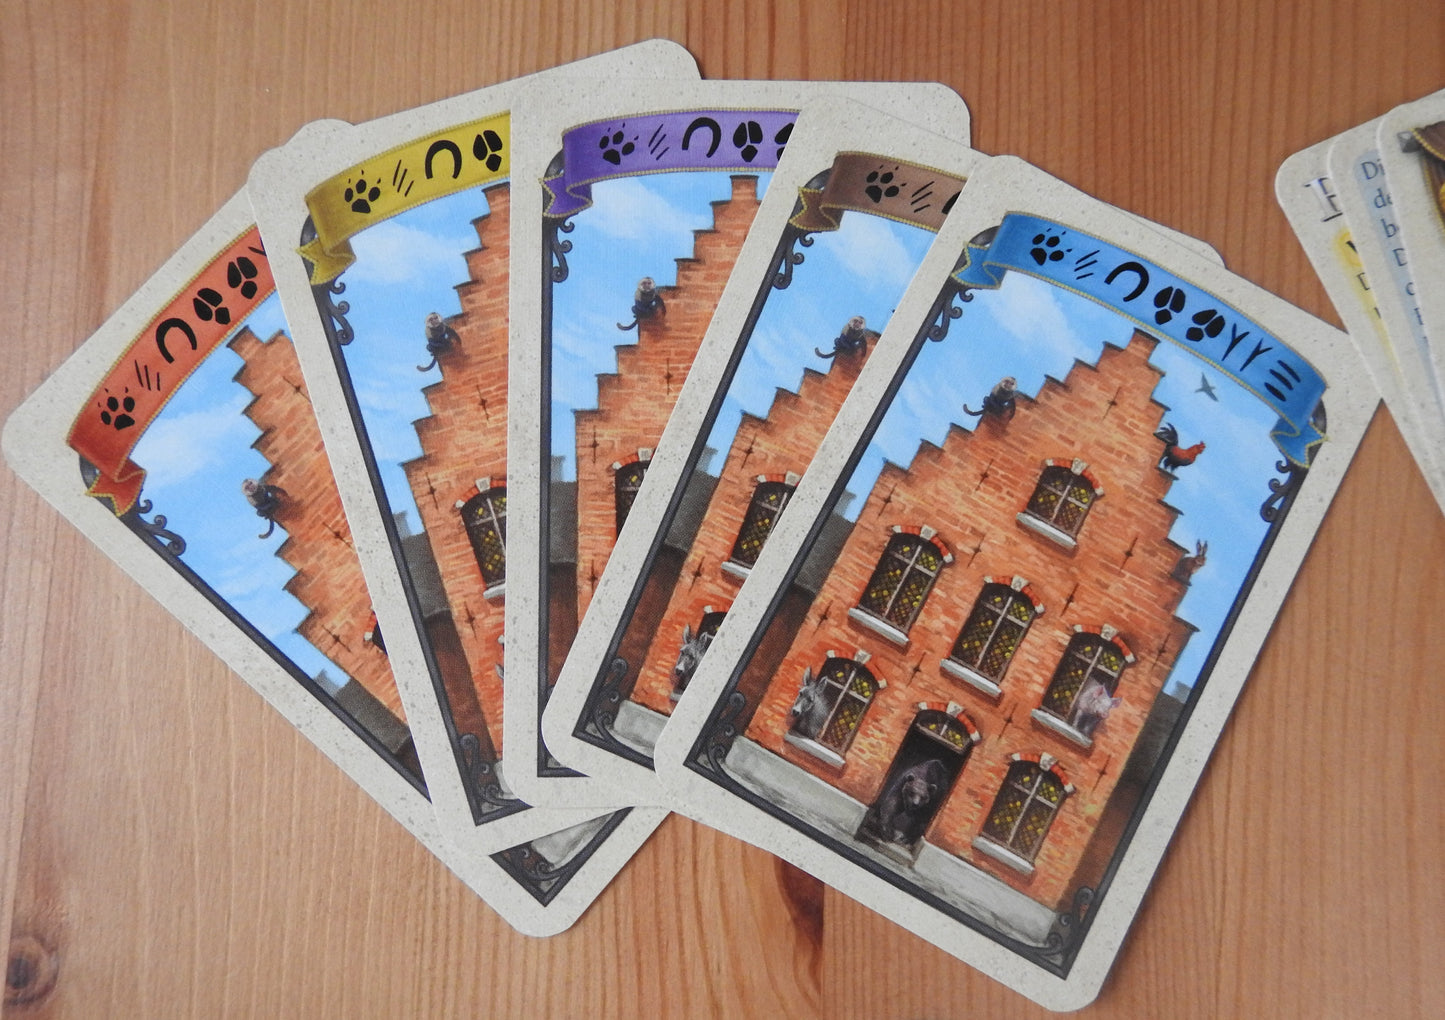 View of the backs of the cards in the five different colours - red, yellow, purple, brown and blue.